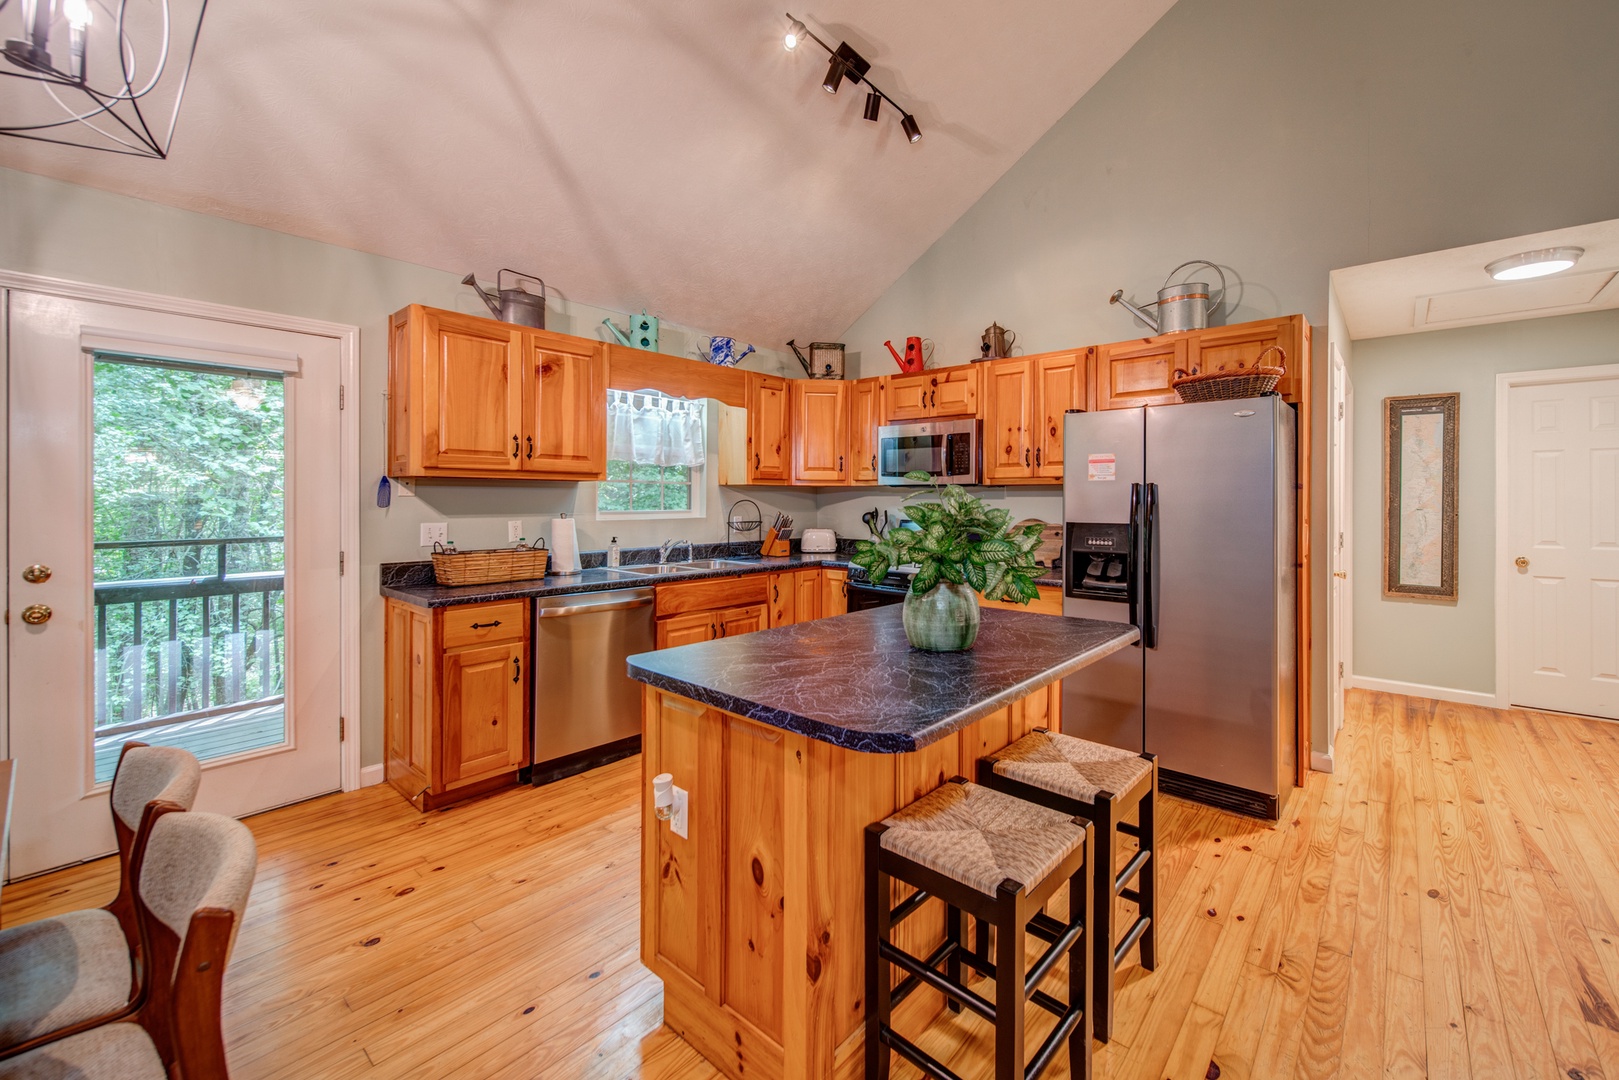 The open kitchen offers ample storage space & all the comforts of home